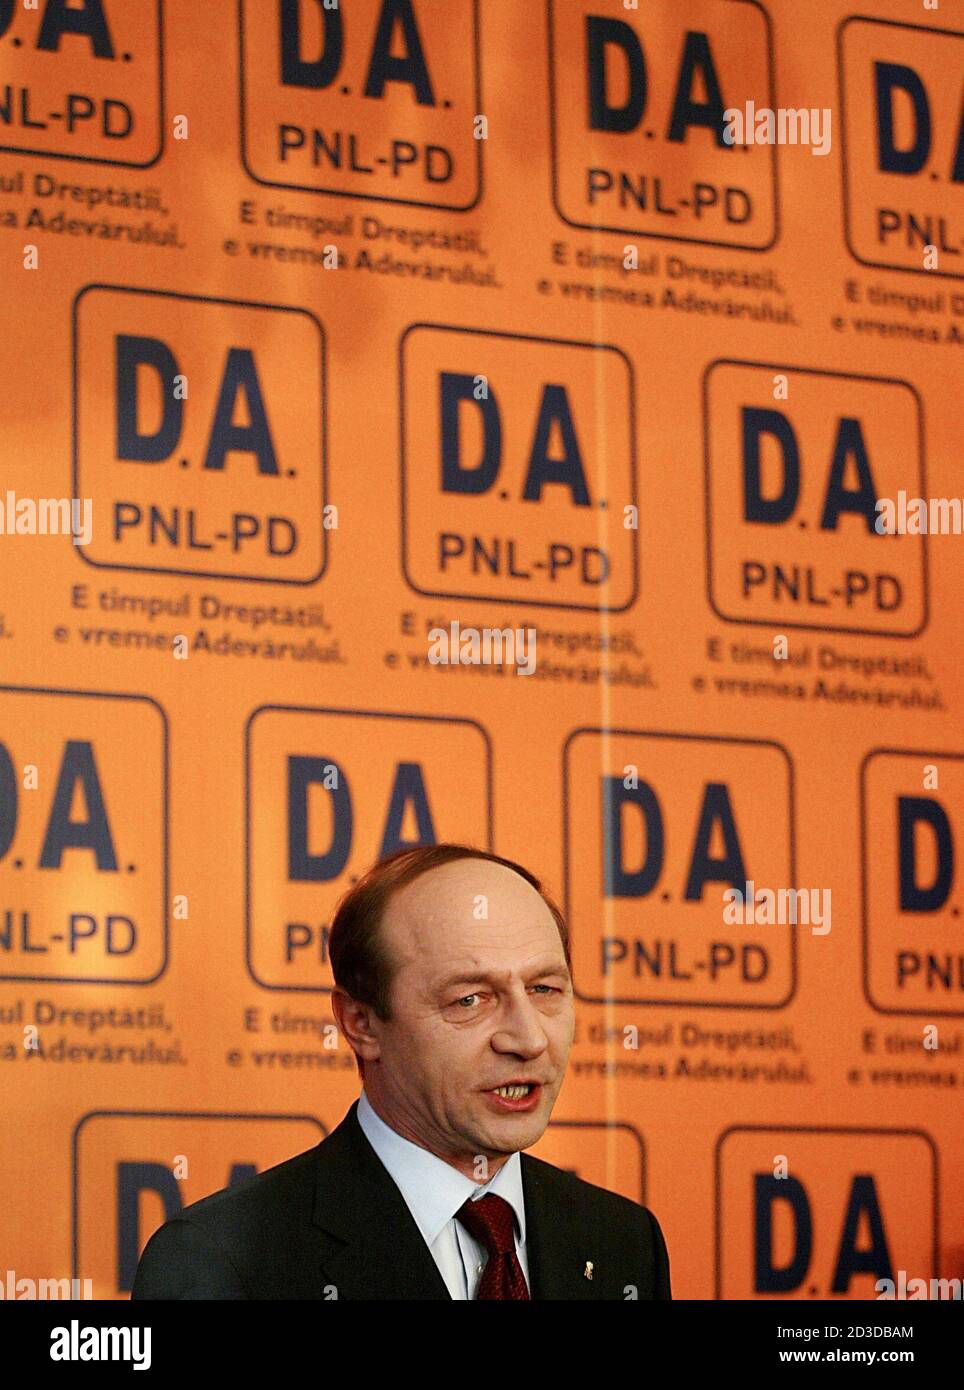 Romania S President Elect Traian Basescu Makes His First Statement After Defeating Prime Minister Adrian Nastase In The Presidential Runoff In Bucharest December 13 2004 Basescu Invited Smaller Parties To Join His Centrist Alliance